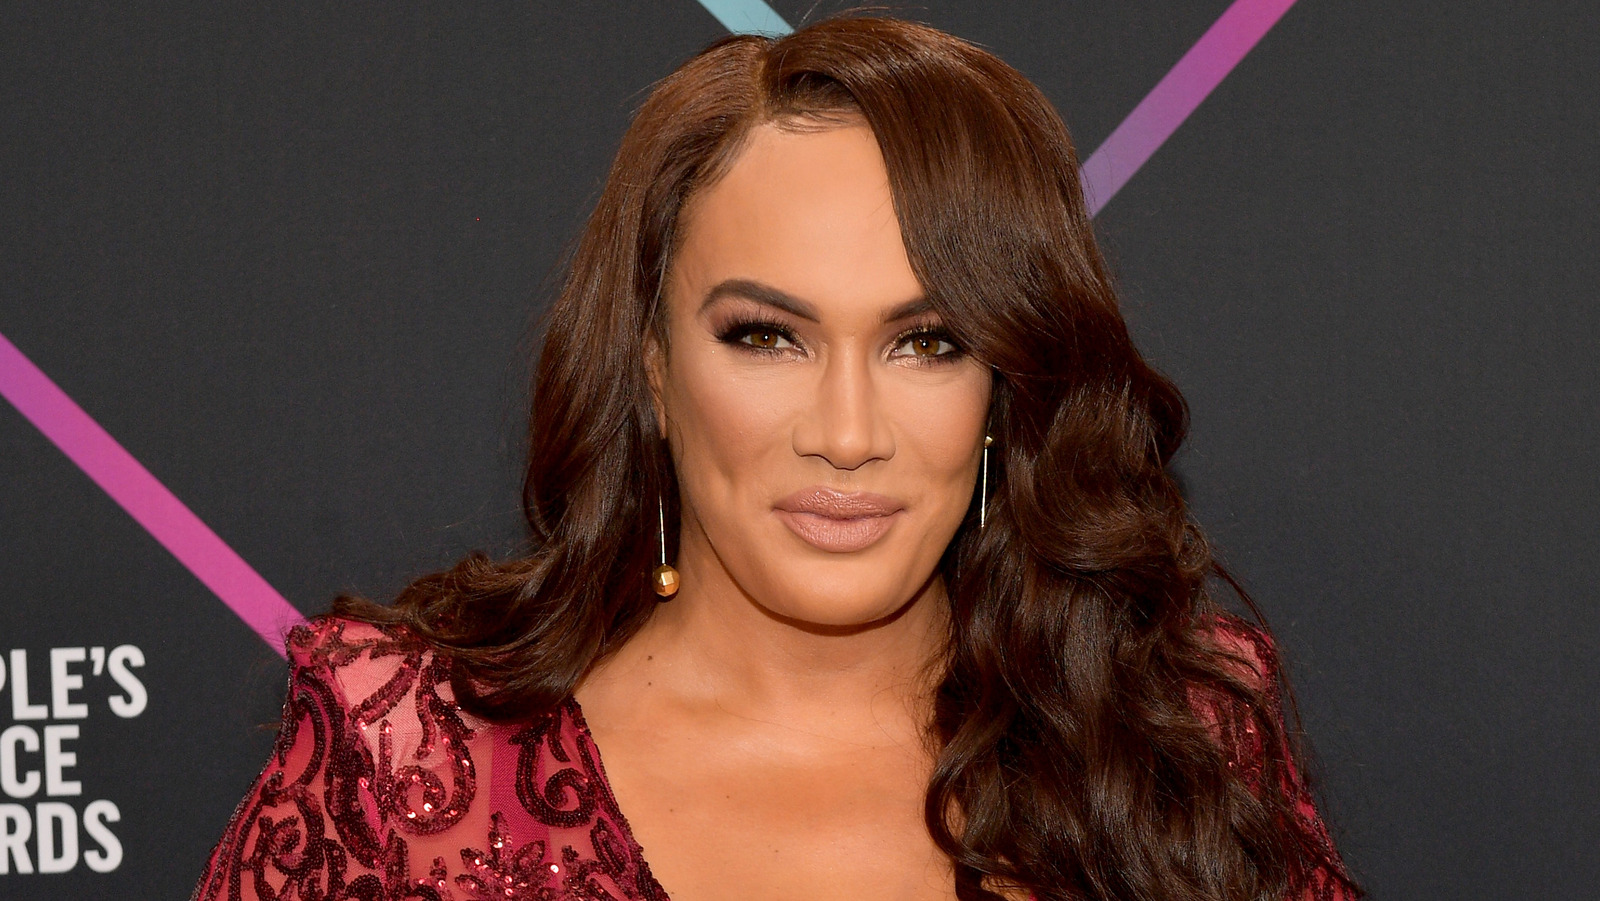 Nia Jax Weighs In On WWE Return Rumors, Thoughts On Current Women's Roster